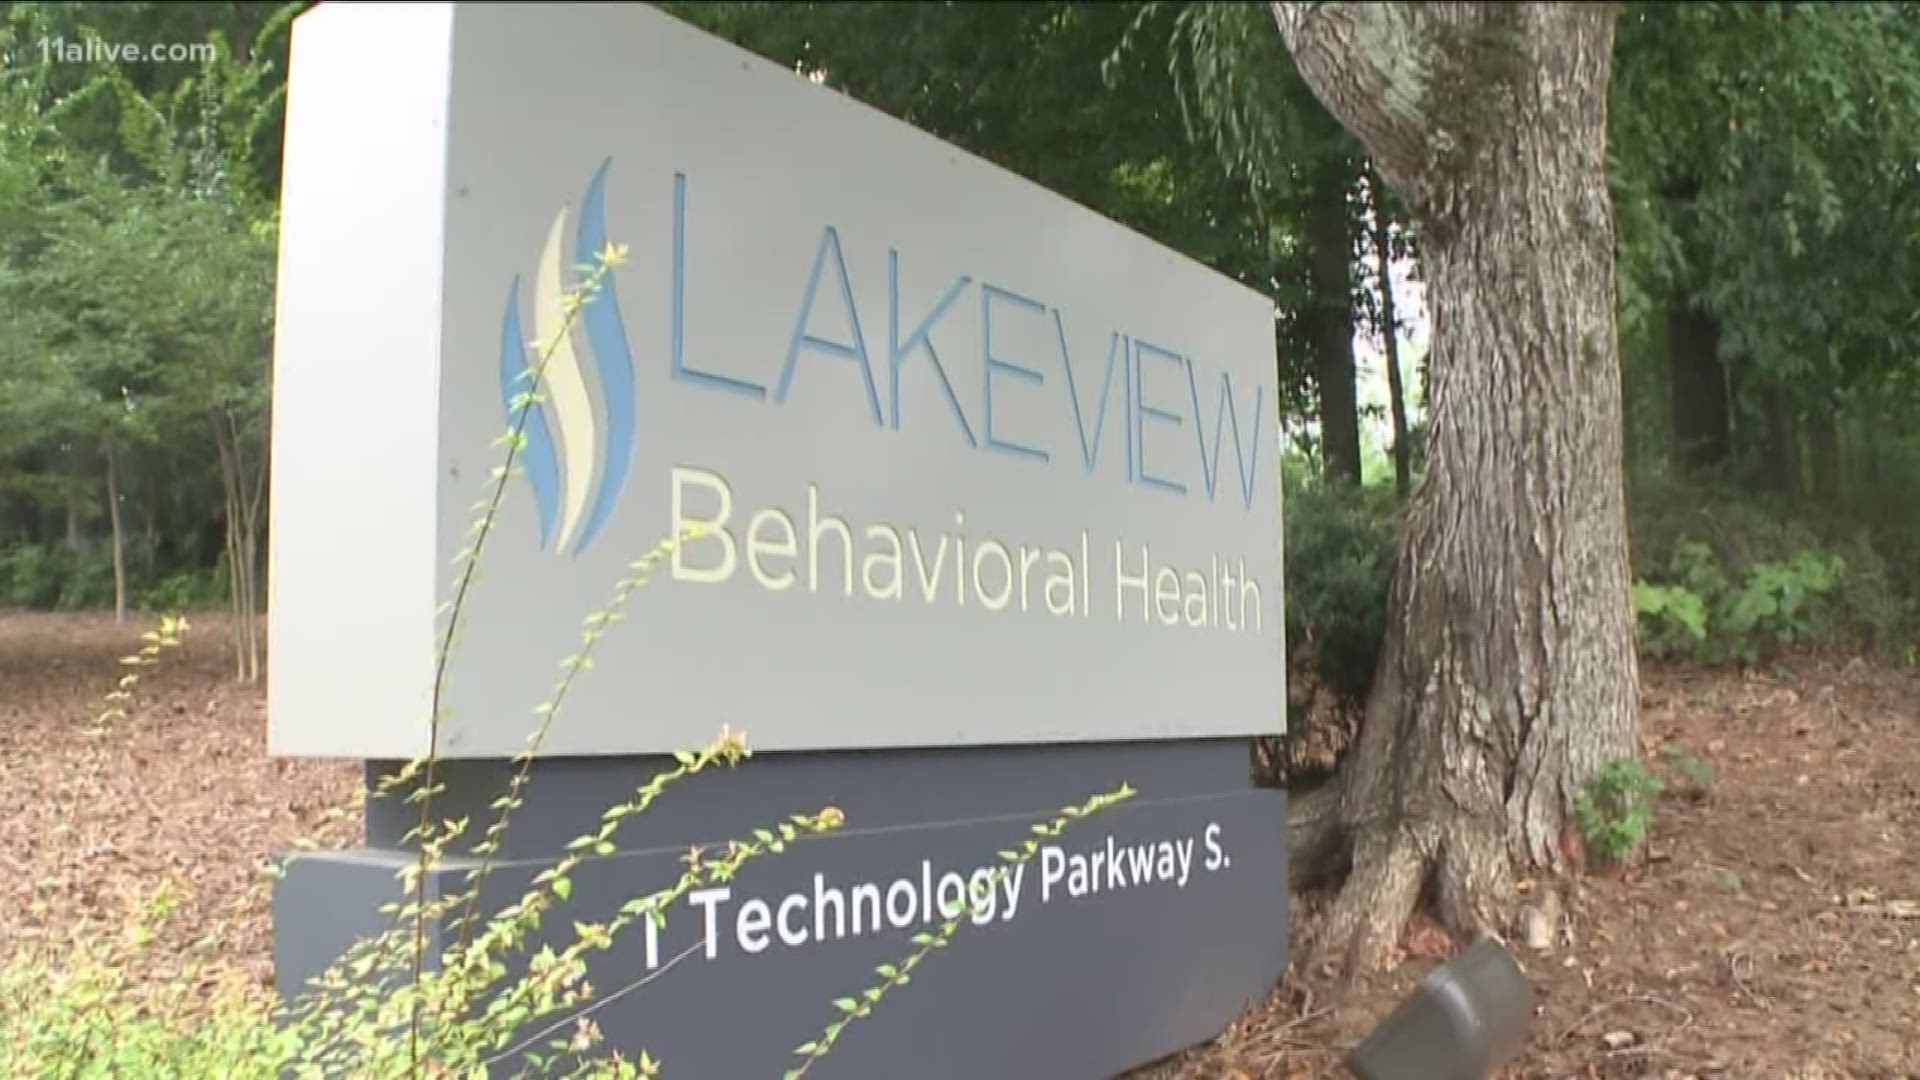 Lakeview Behavioral Health is facing allegations of emotional, physical and sexual abuse.